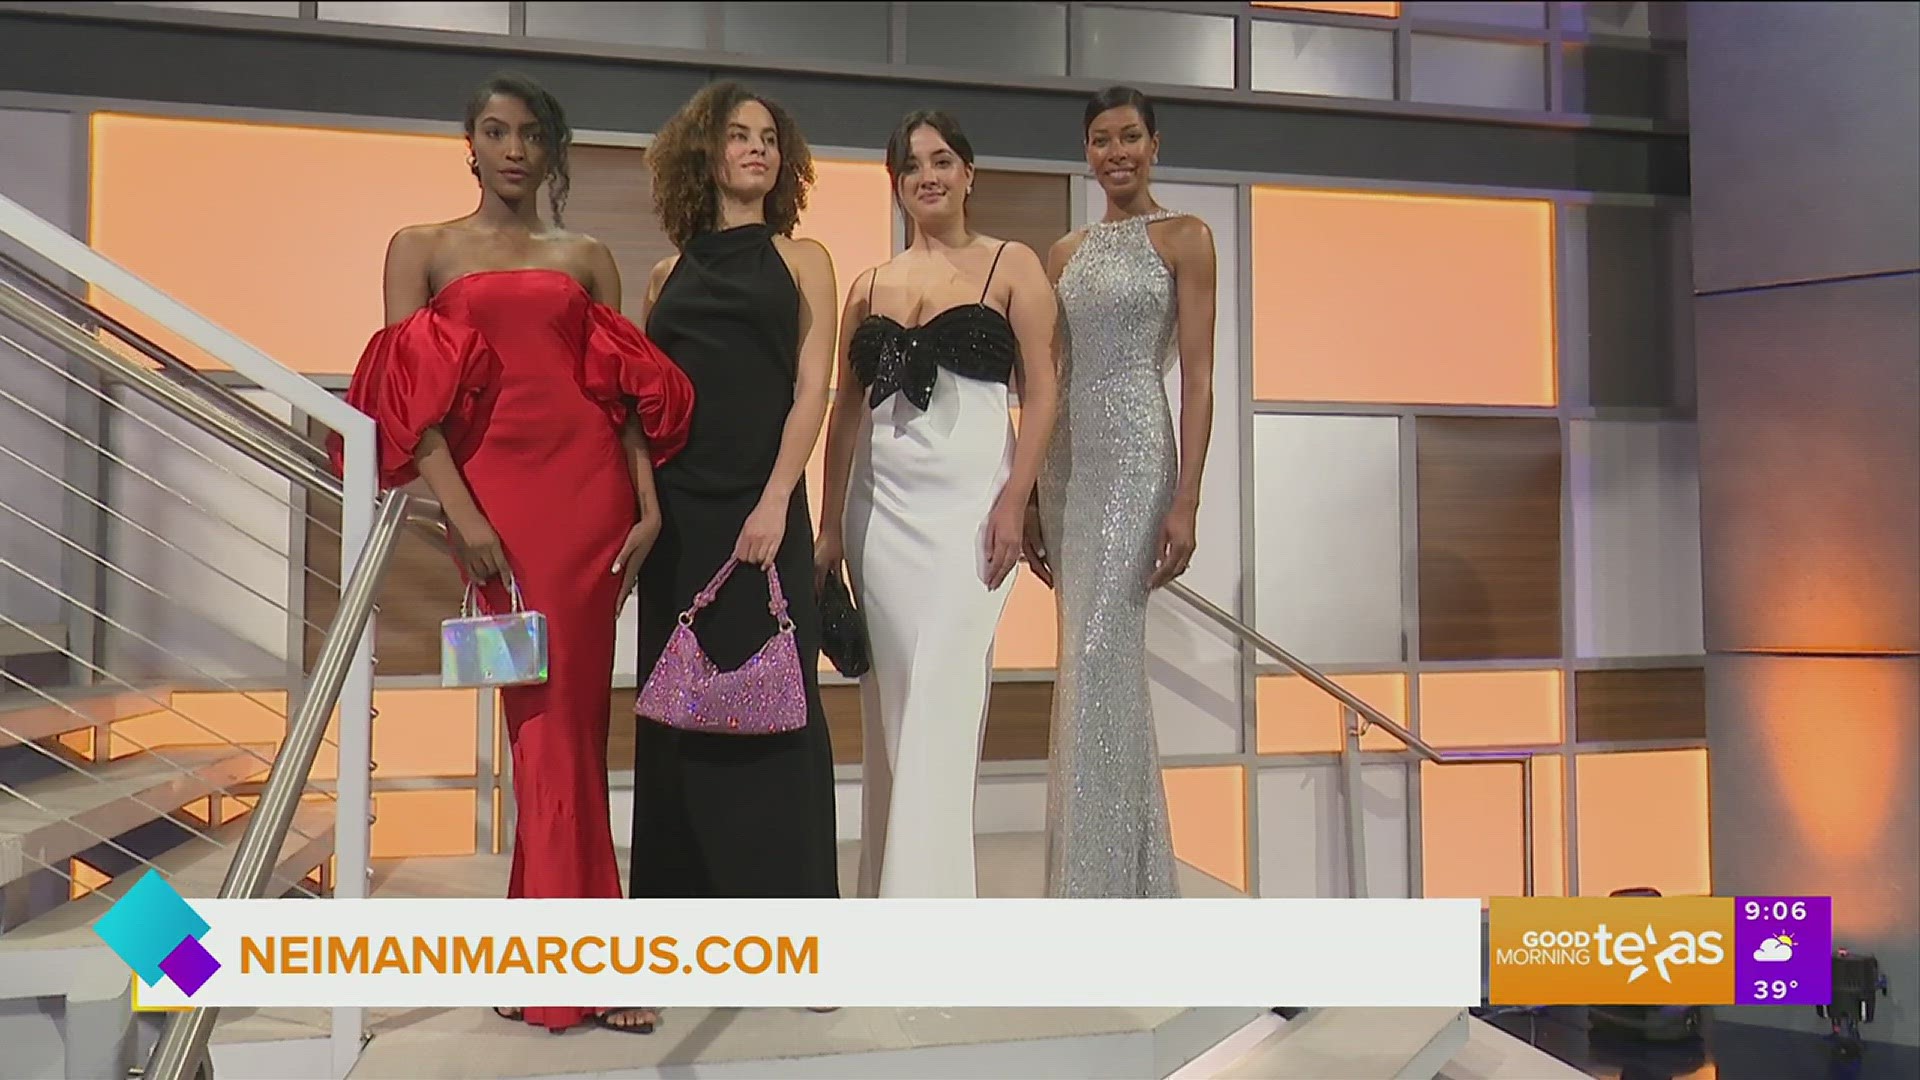 Jodi Kahn with Neiman Marcus shows you how to copycat some of your favorite Oscars looks. Go to neimanmarcus.com for more information.